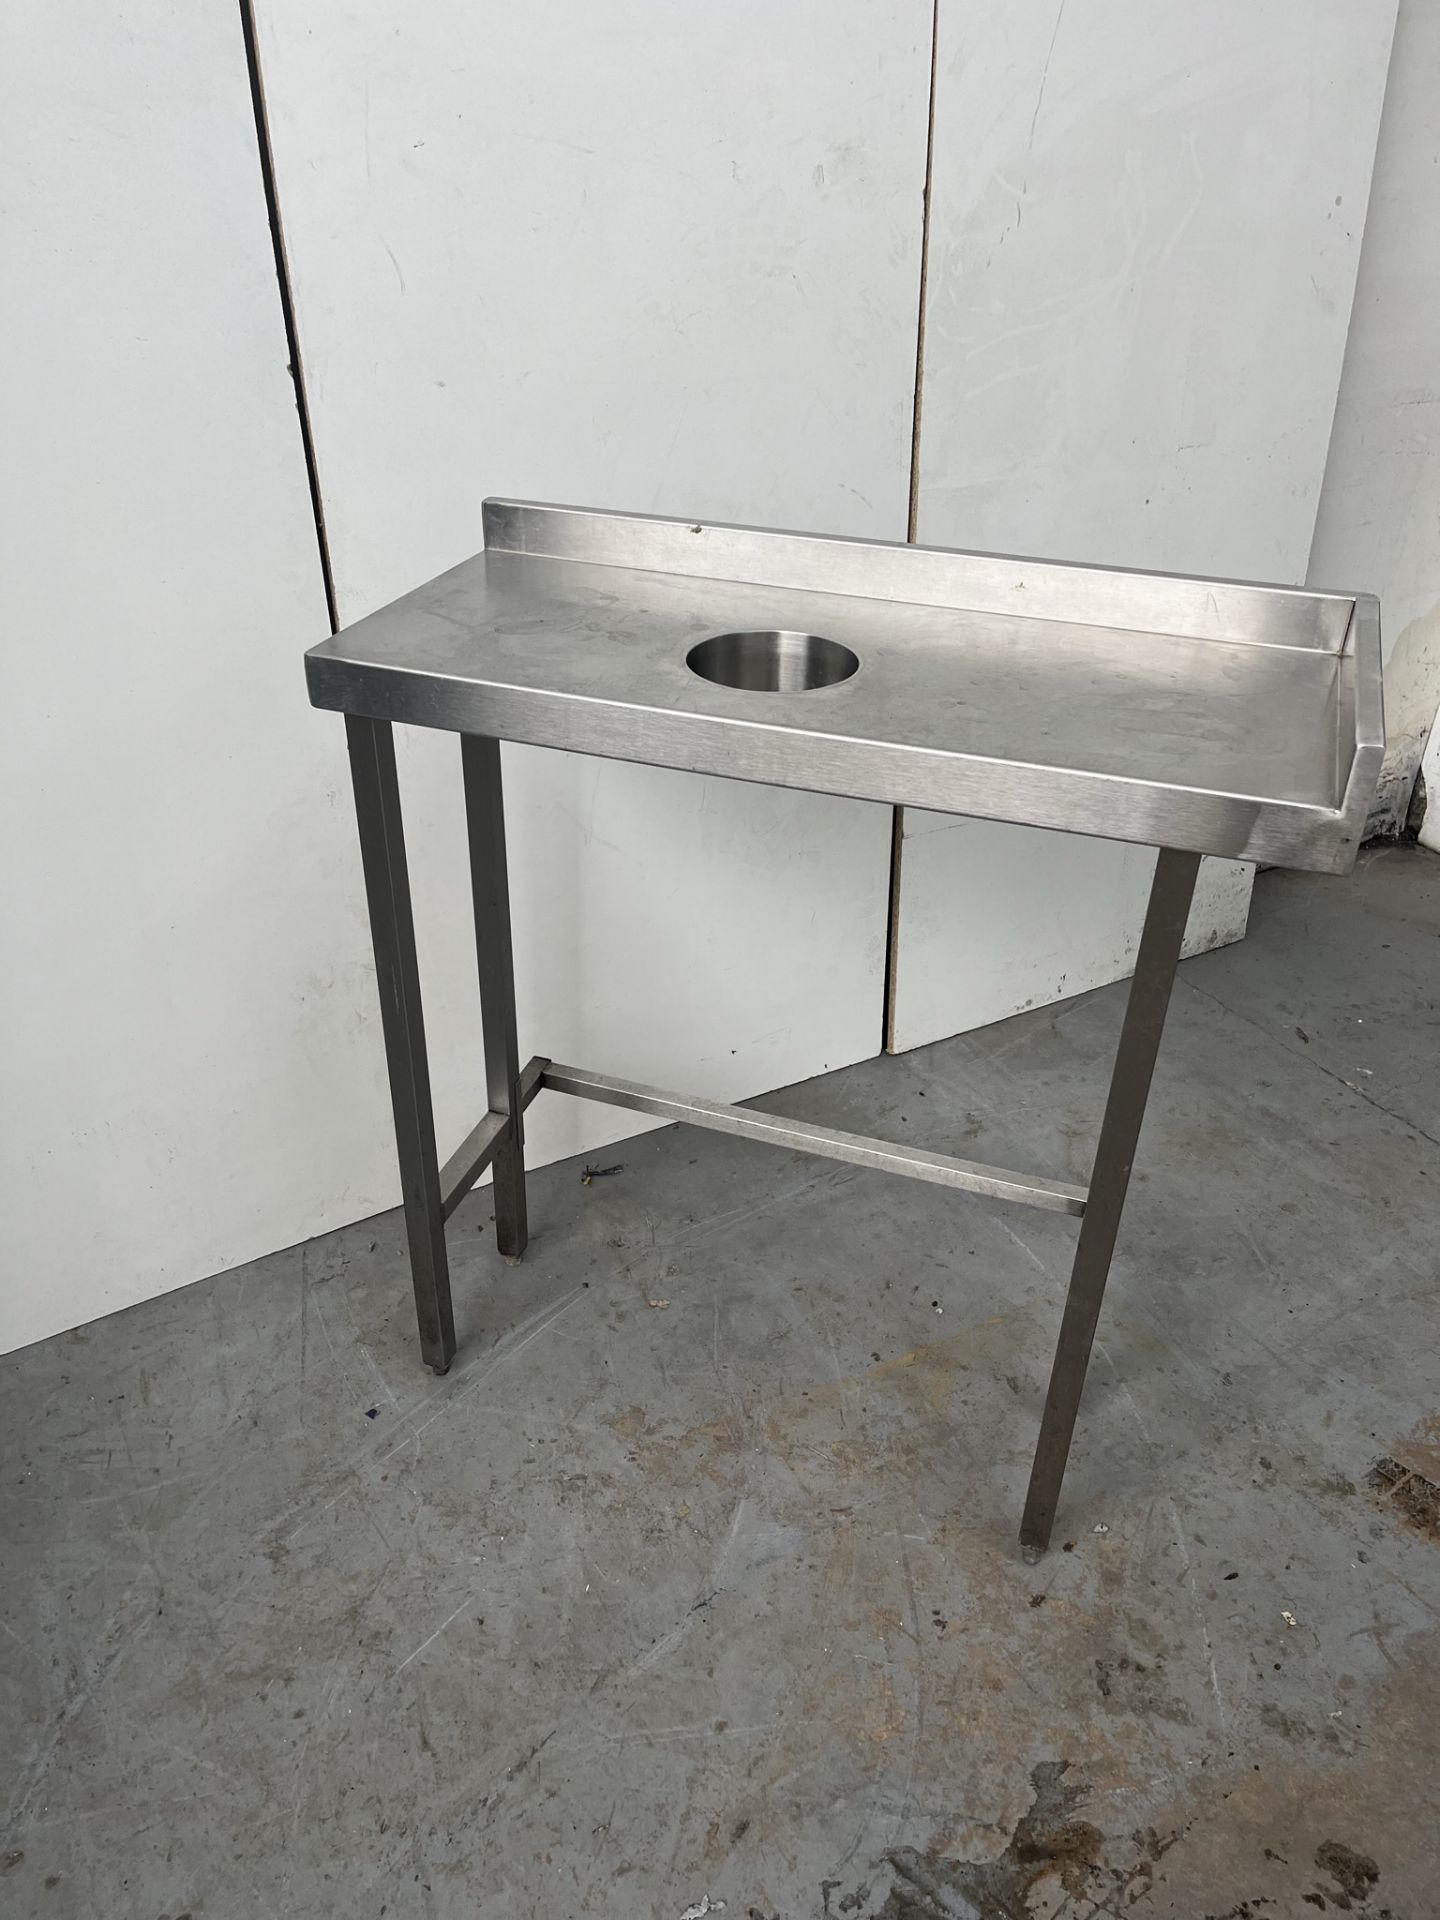 850mm Stainless Steel Catering Preperation Table With Waste Disposal Hole